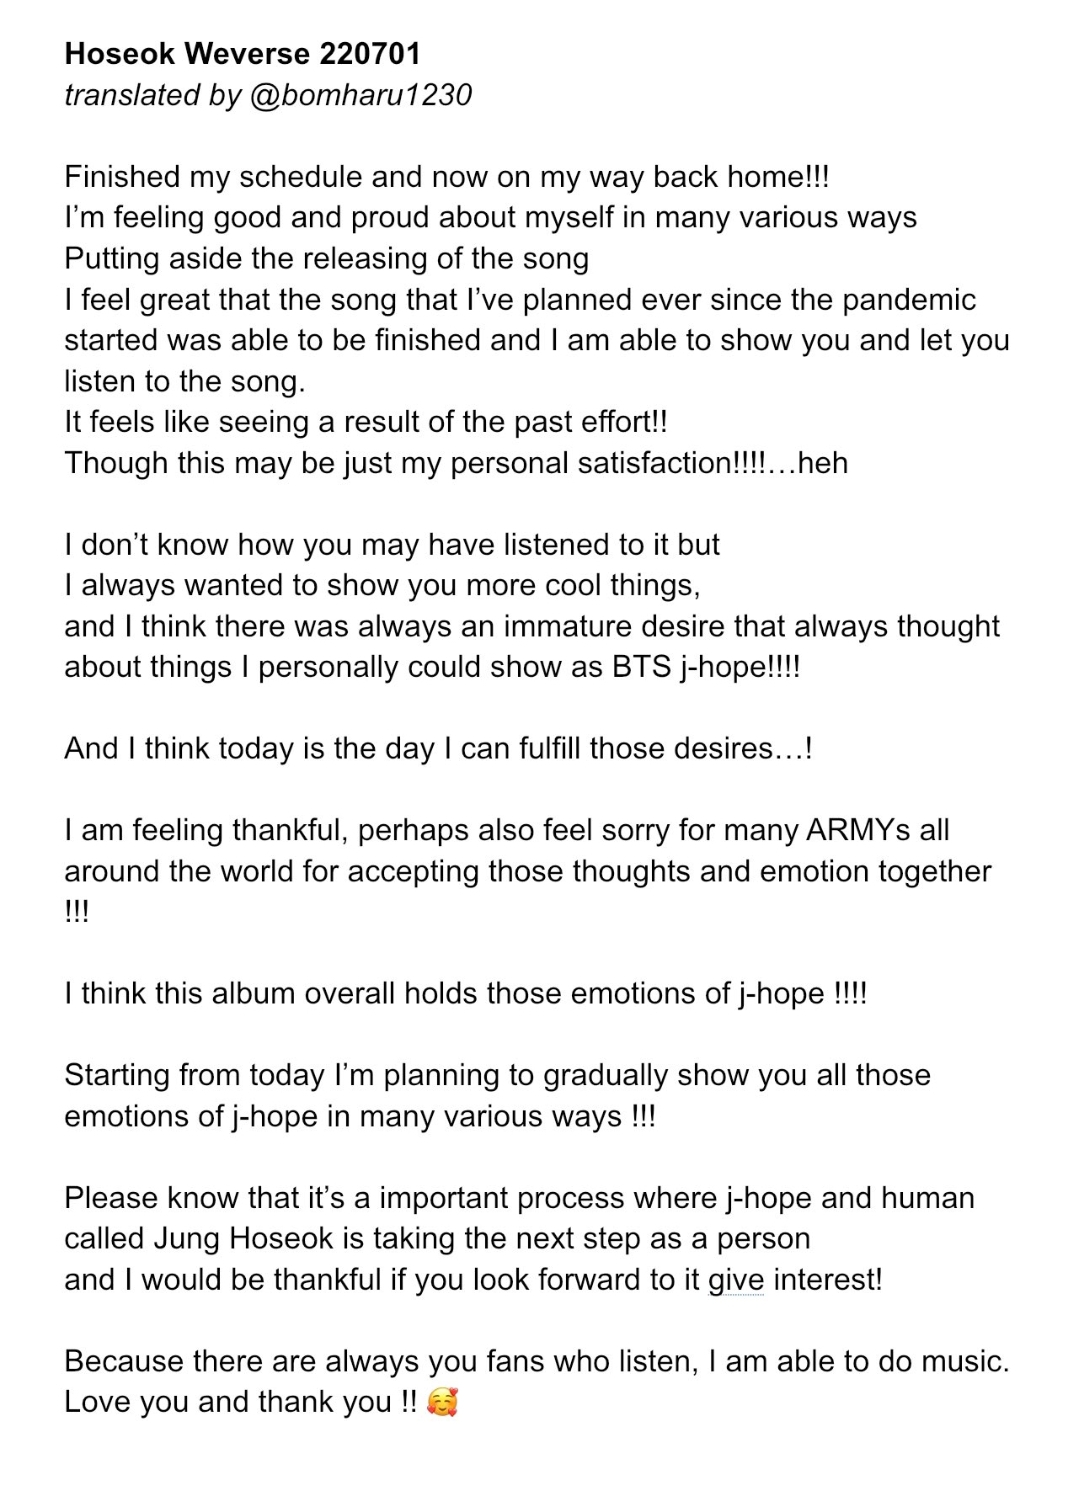 Jhope Pens a Sweet Note for Fans about his New Single “More". - Asiana Times